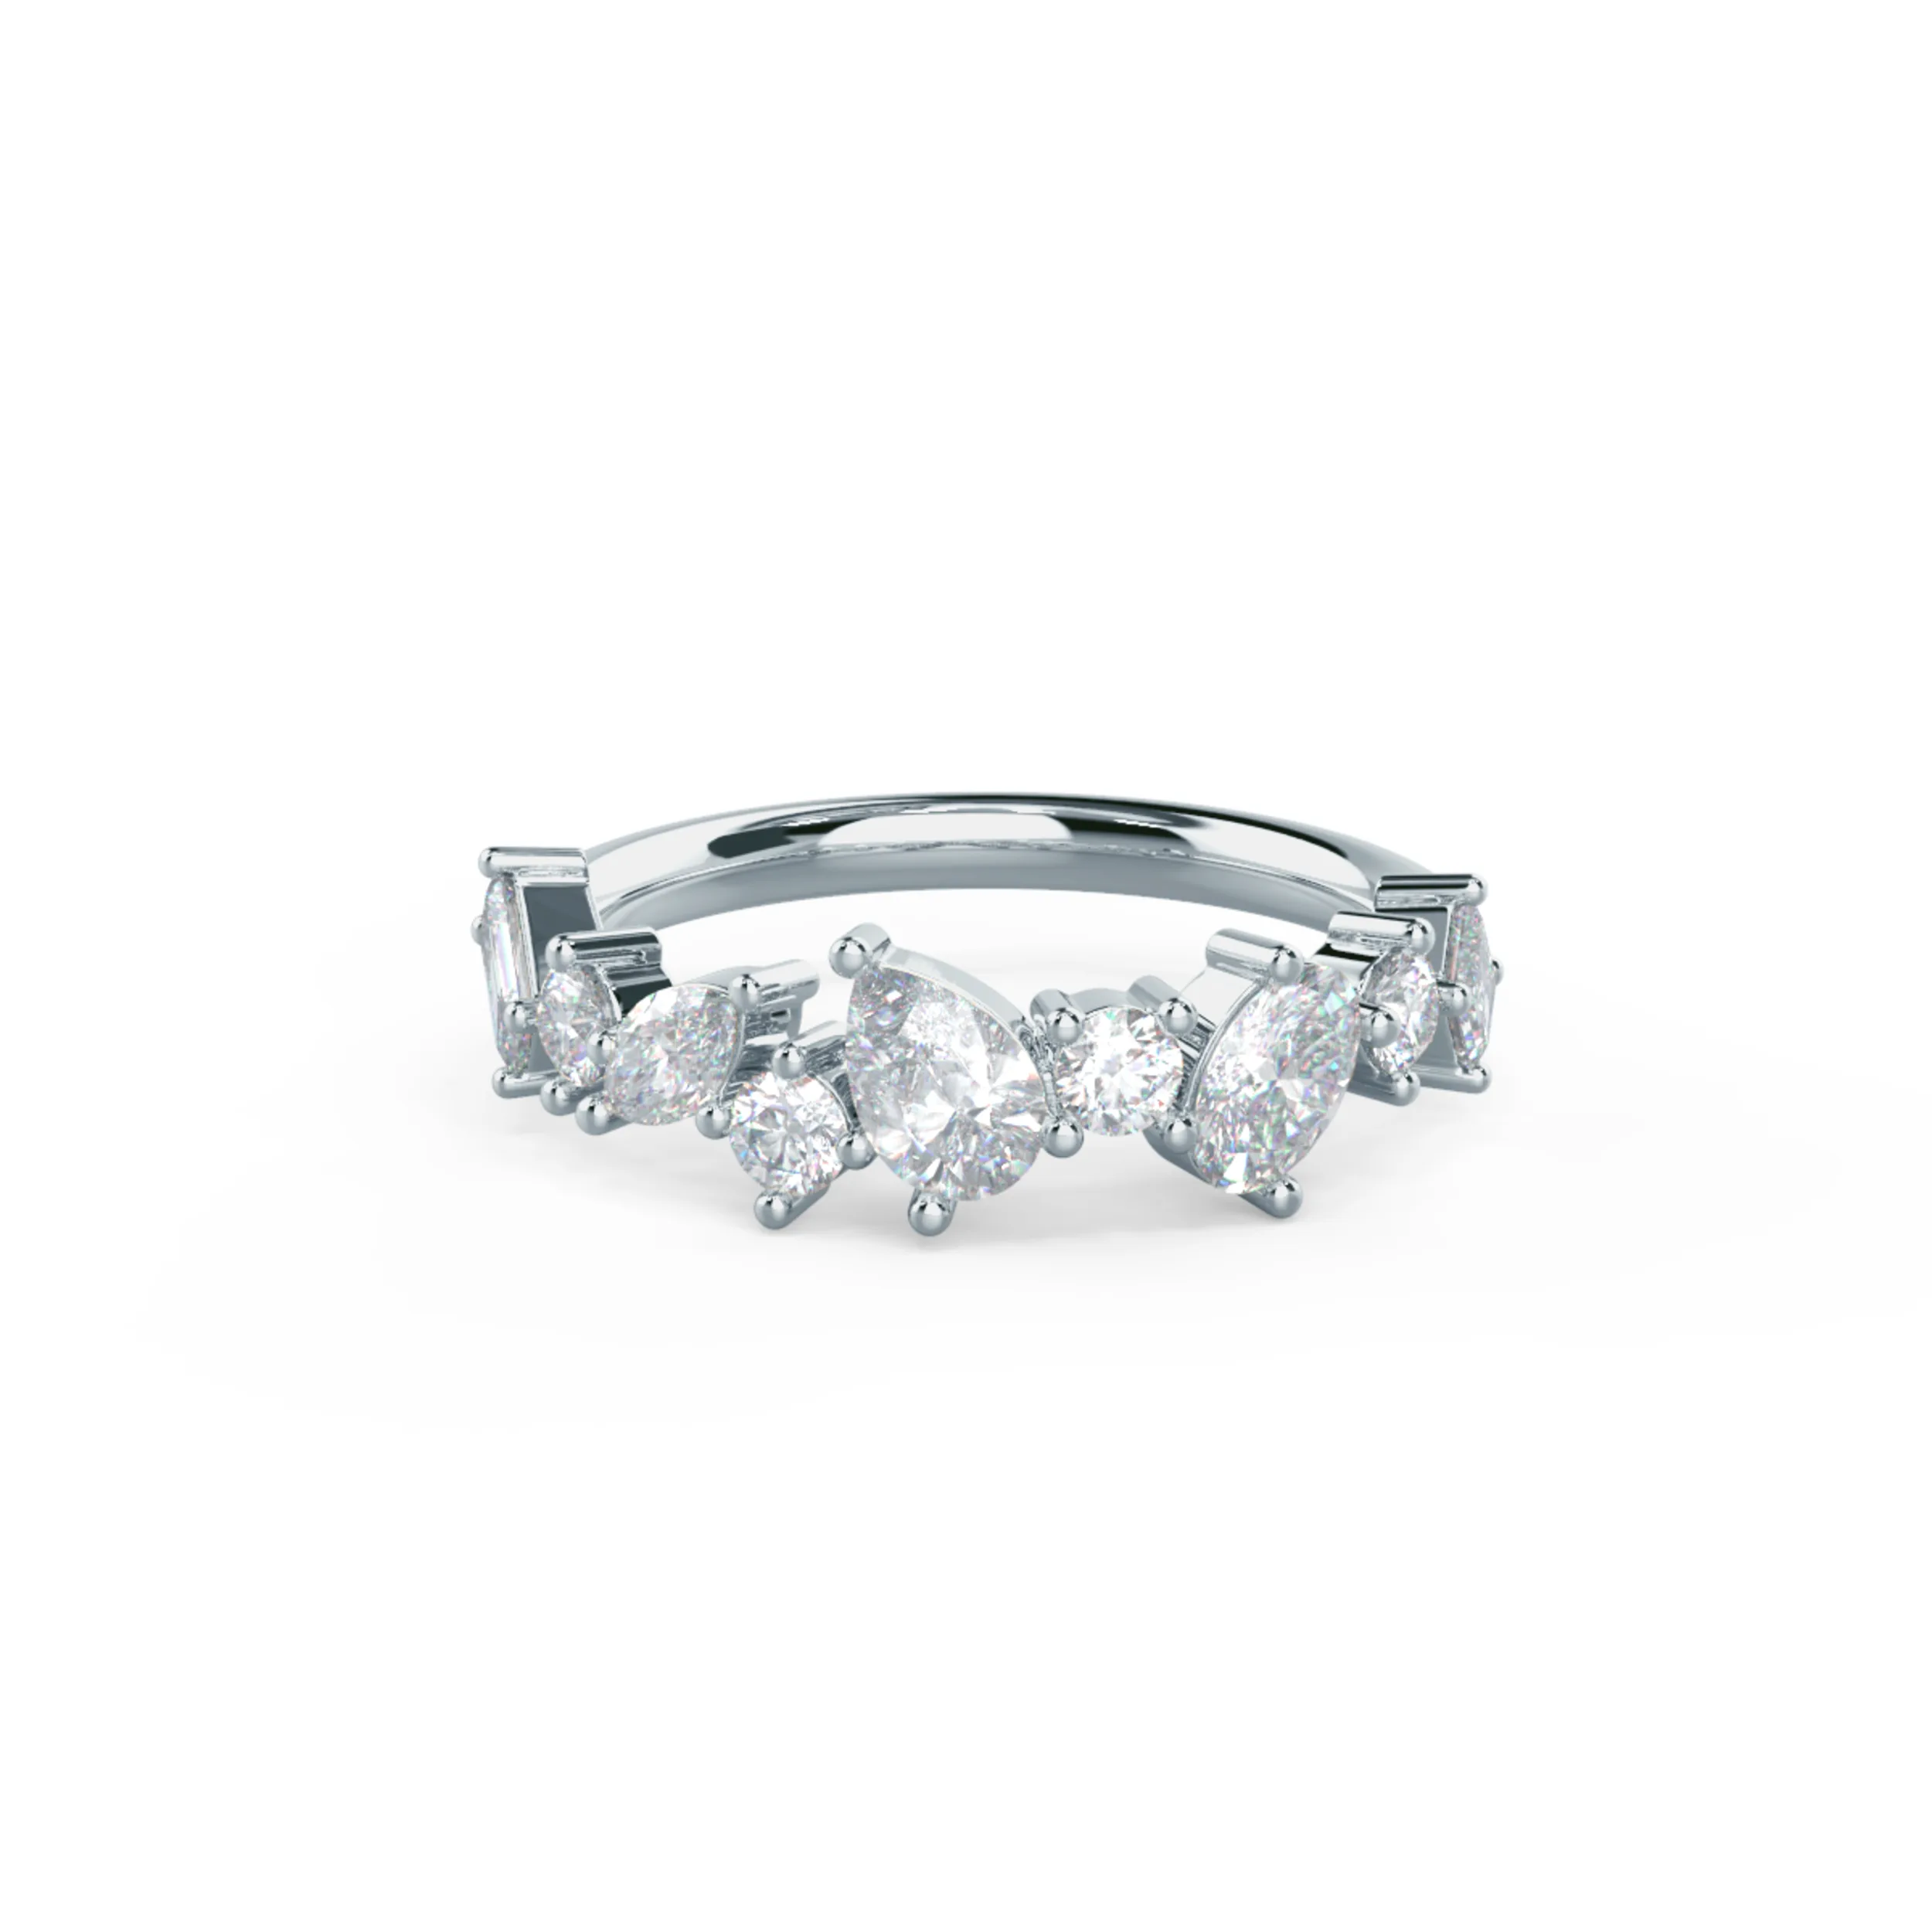 Hand Selected 1.75 ct Lab Diamonds set in 18k White Gold Alyssa Half Band (Main View)